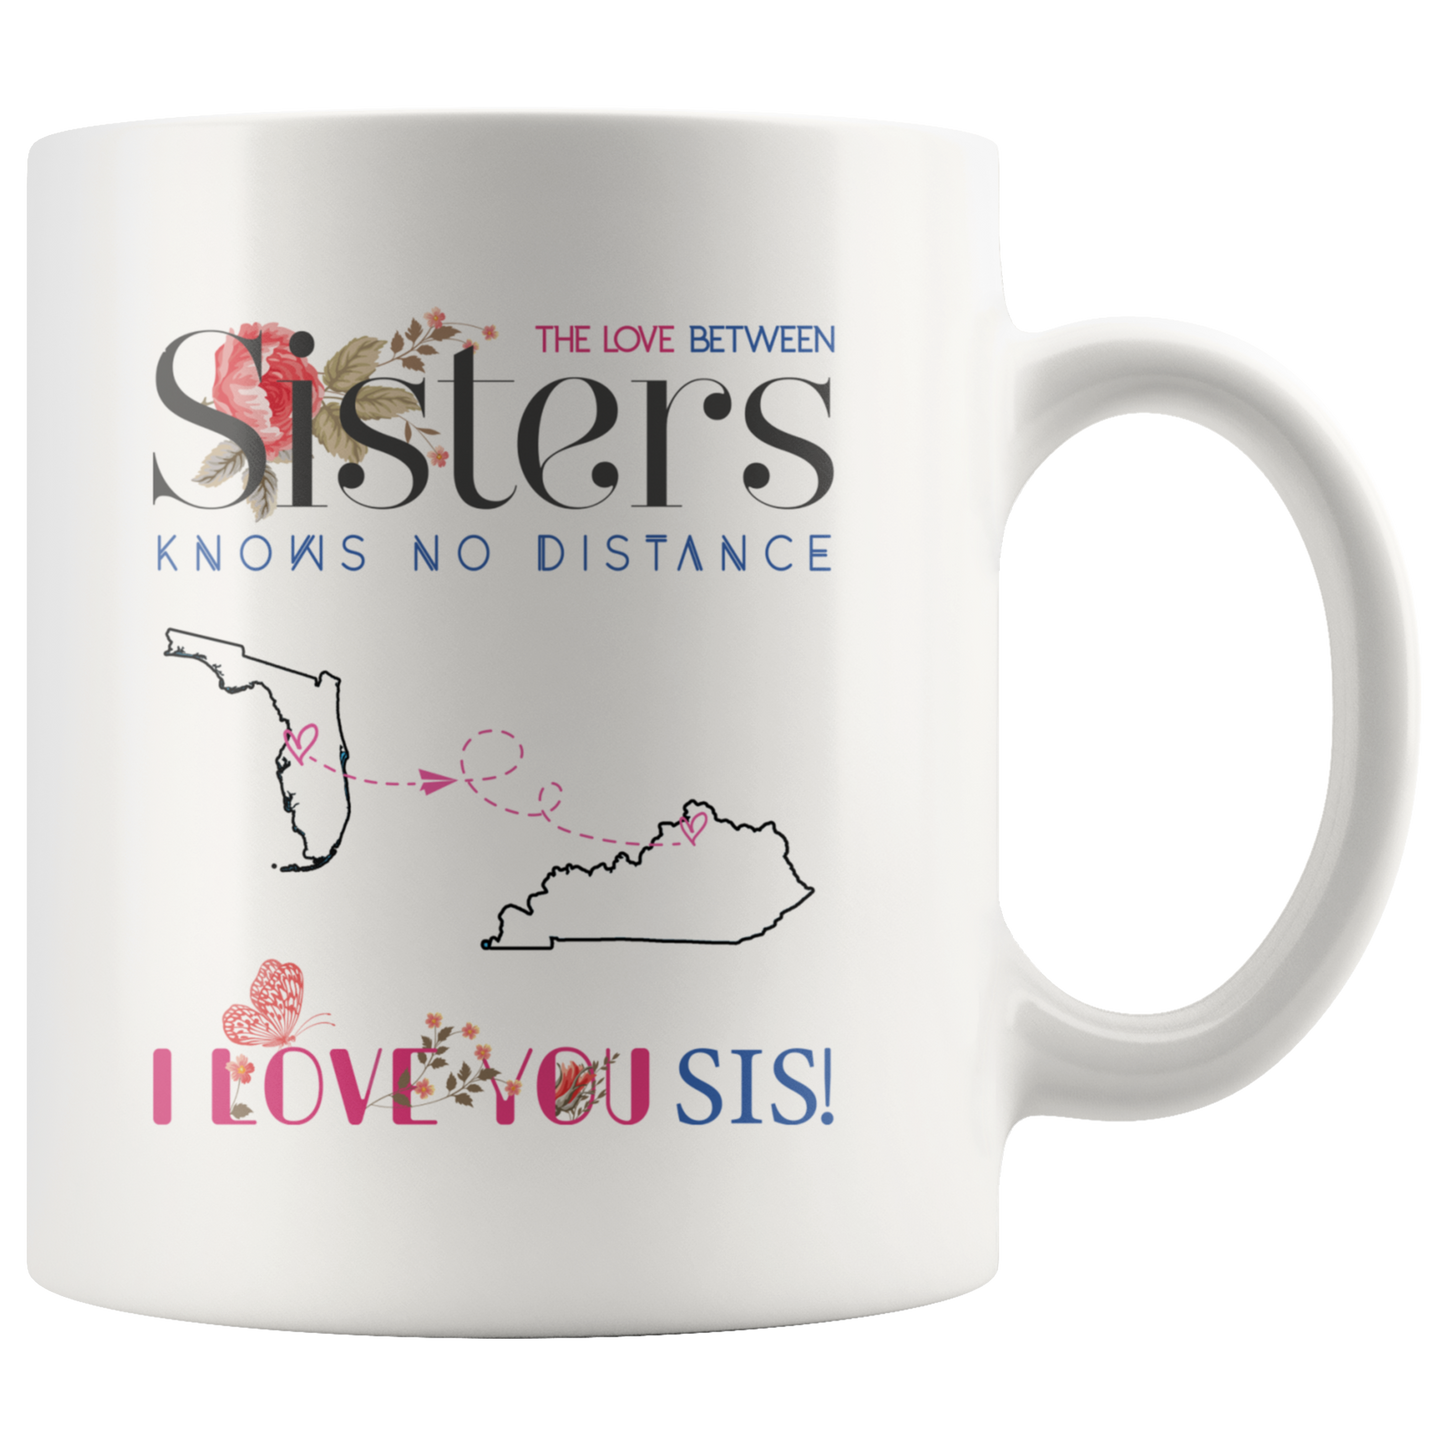 M-20519952-sp-17255 - Long Distance Relationship Gift - The Love Between Sisters K